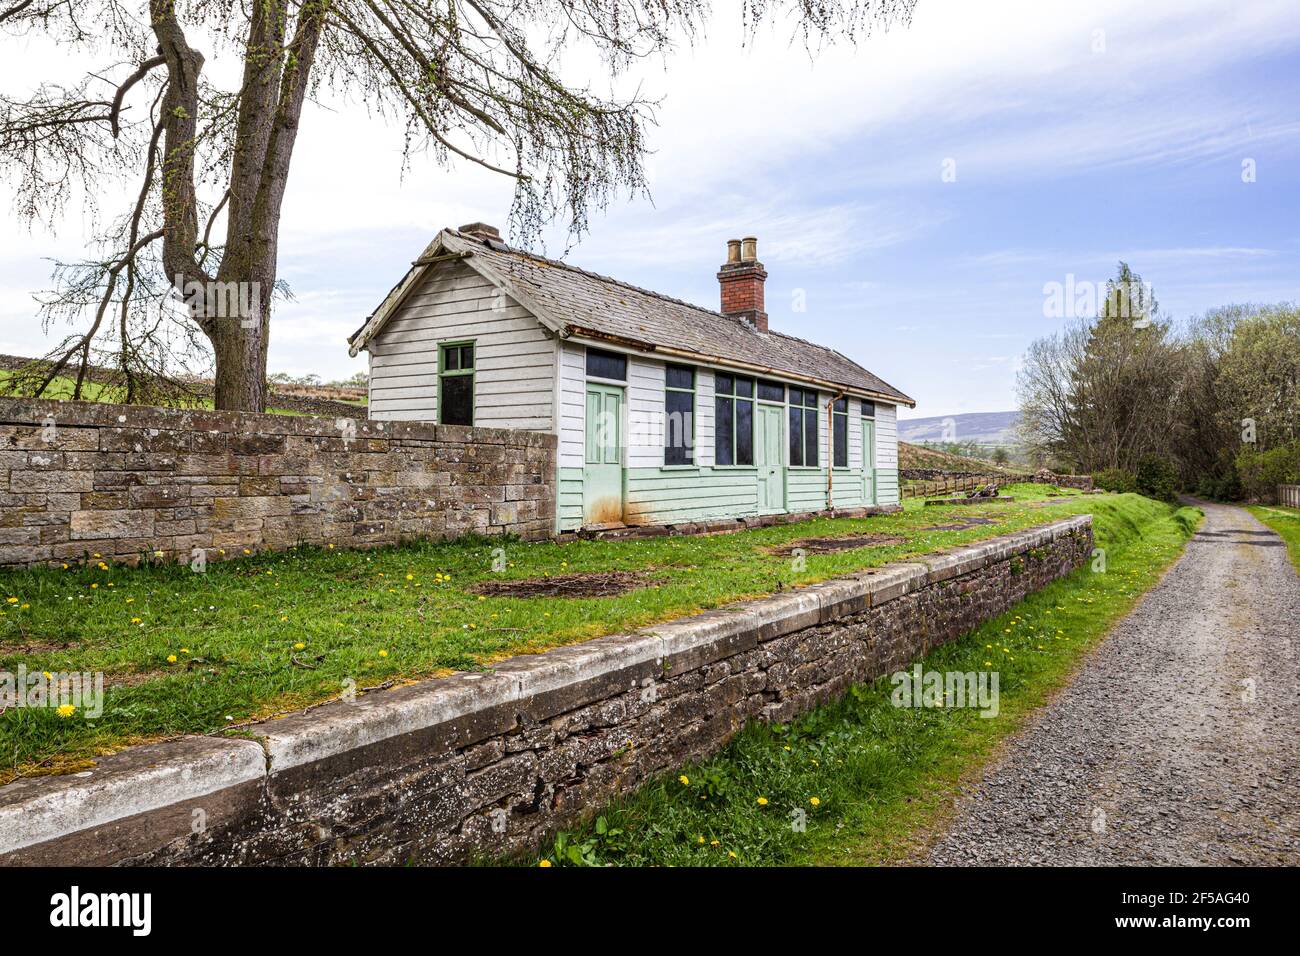 Old Slaggyford Railway Station, Northumberland UK. It was on the Alston Line from Haltwhistle to Alston. The line opened in 1852 and closed in 1976. Stock Photo